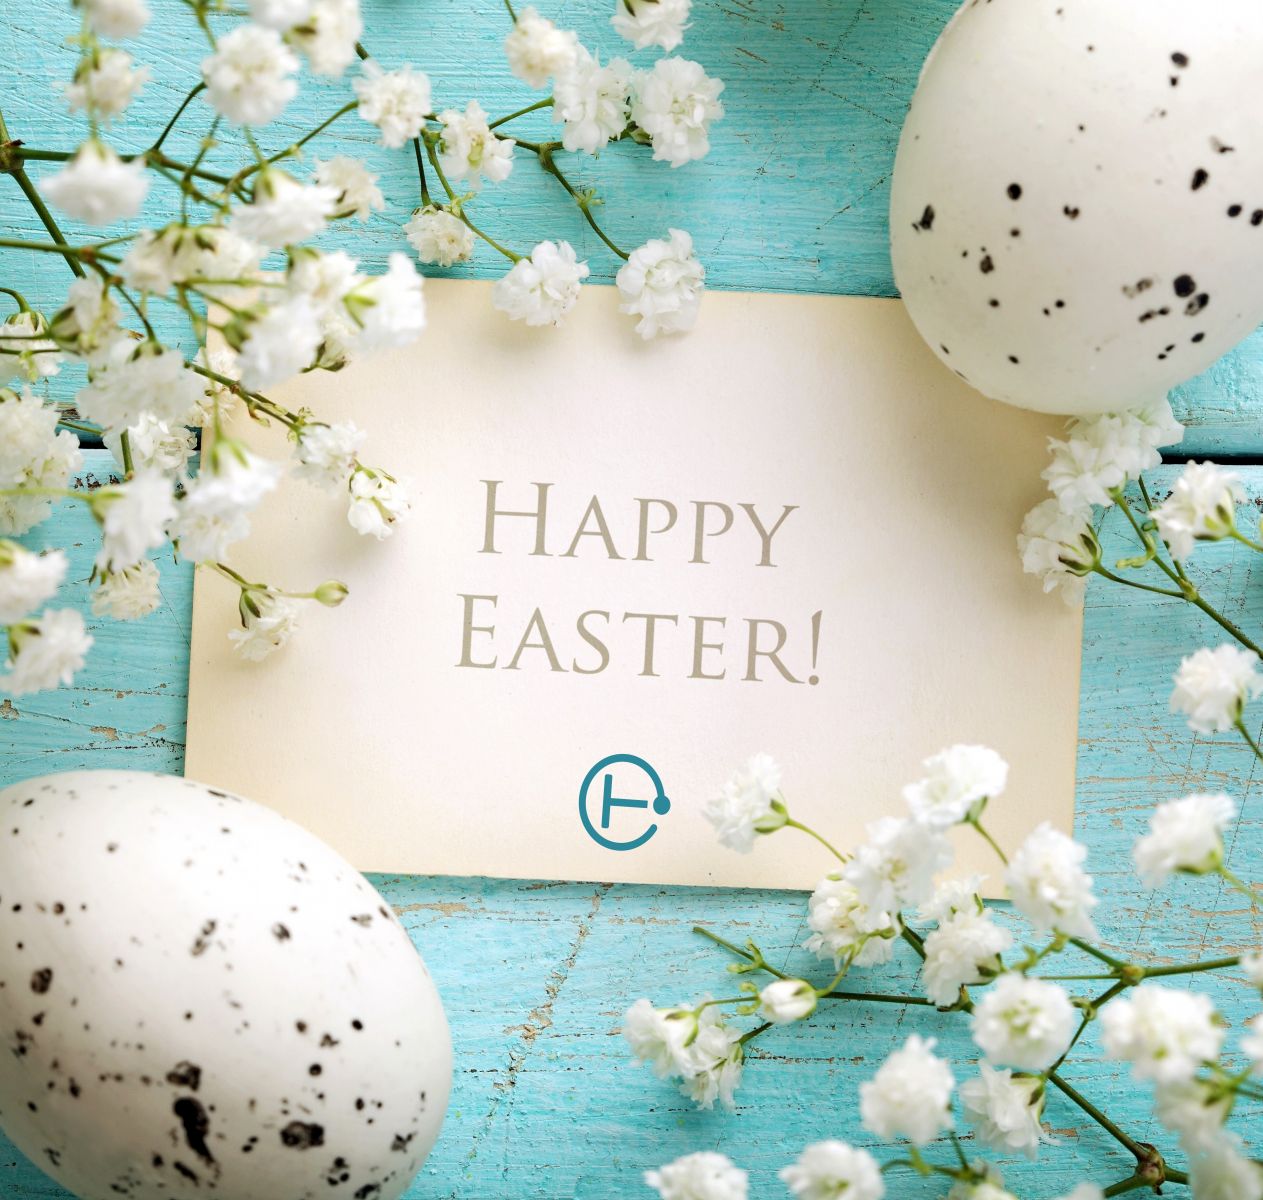 HealThink wishes you Happy Easter!